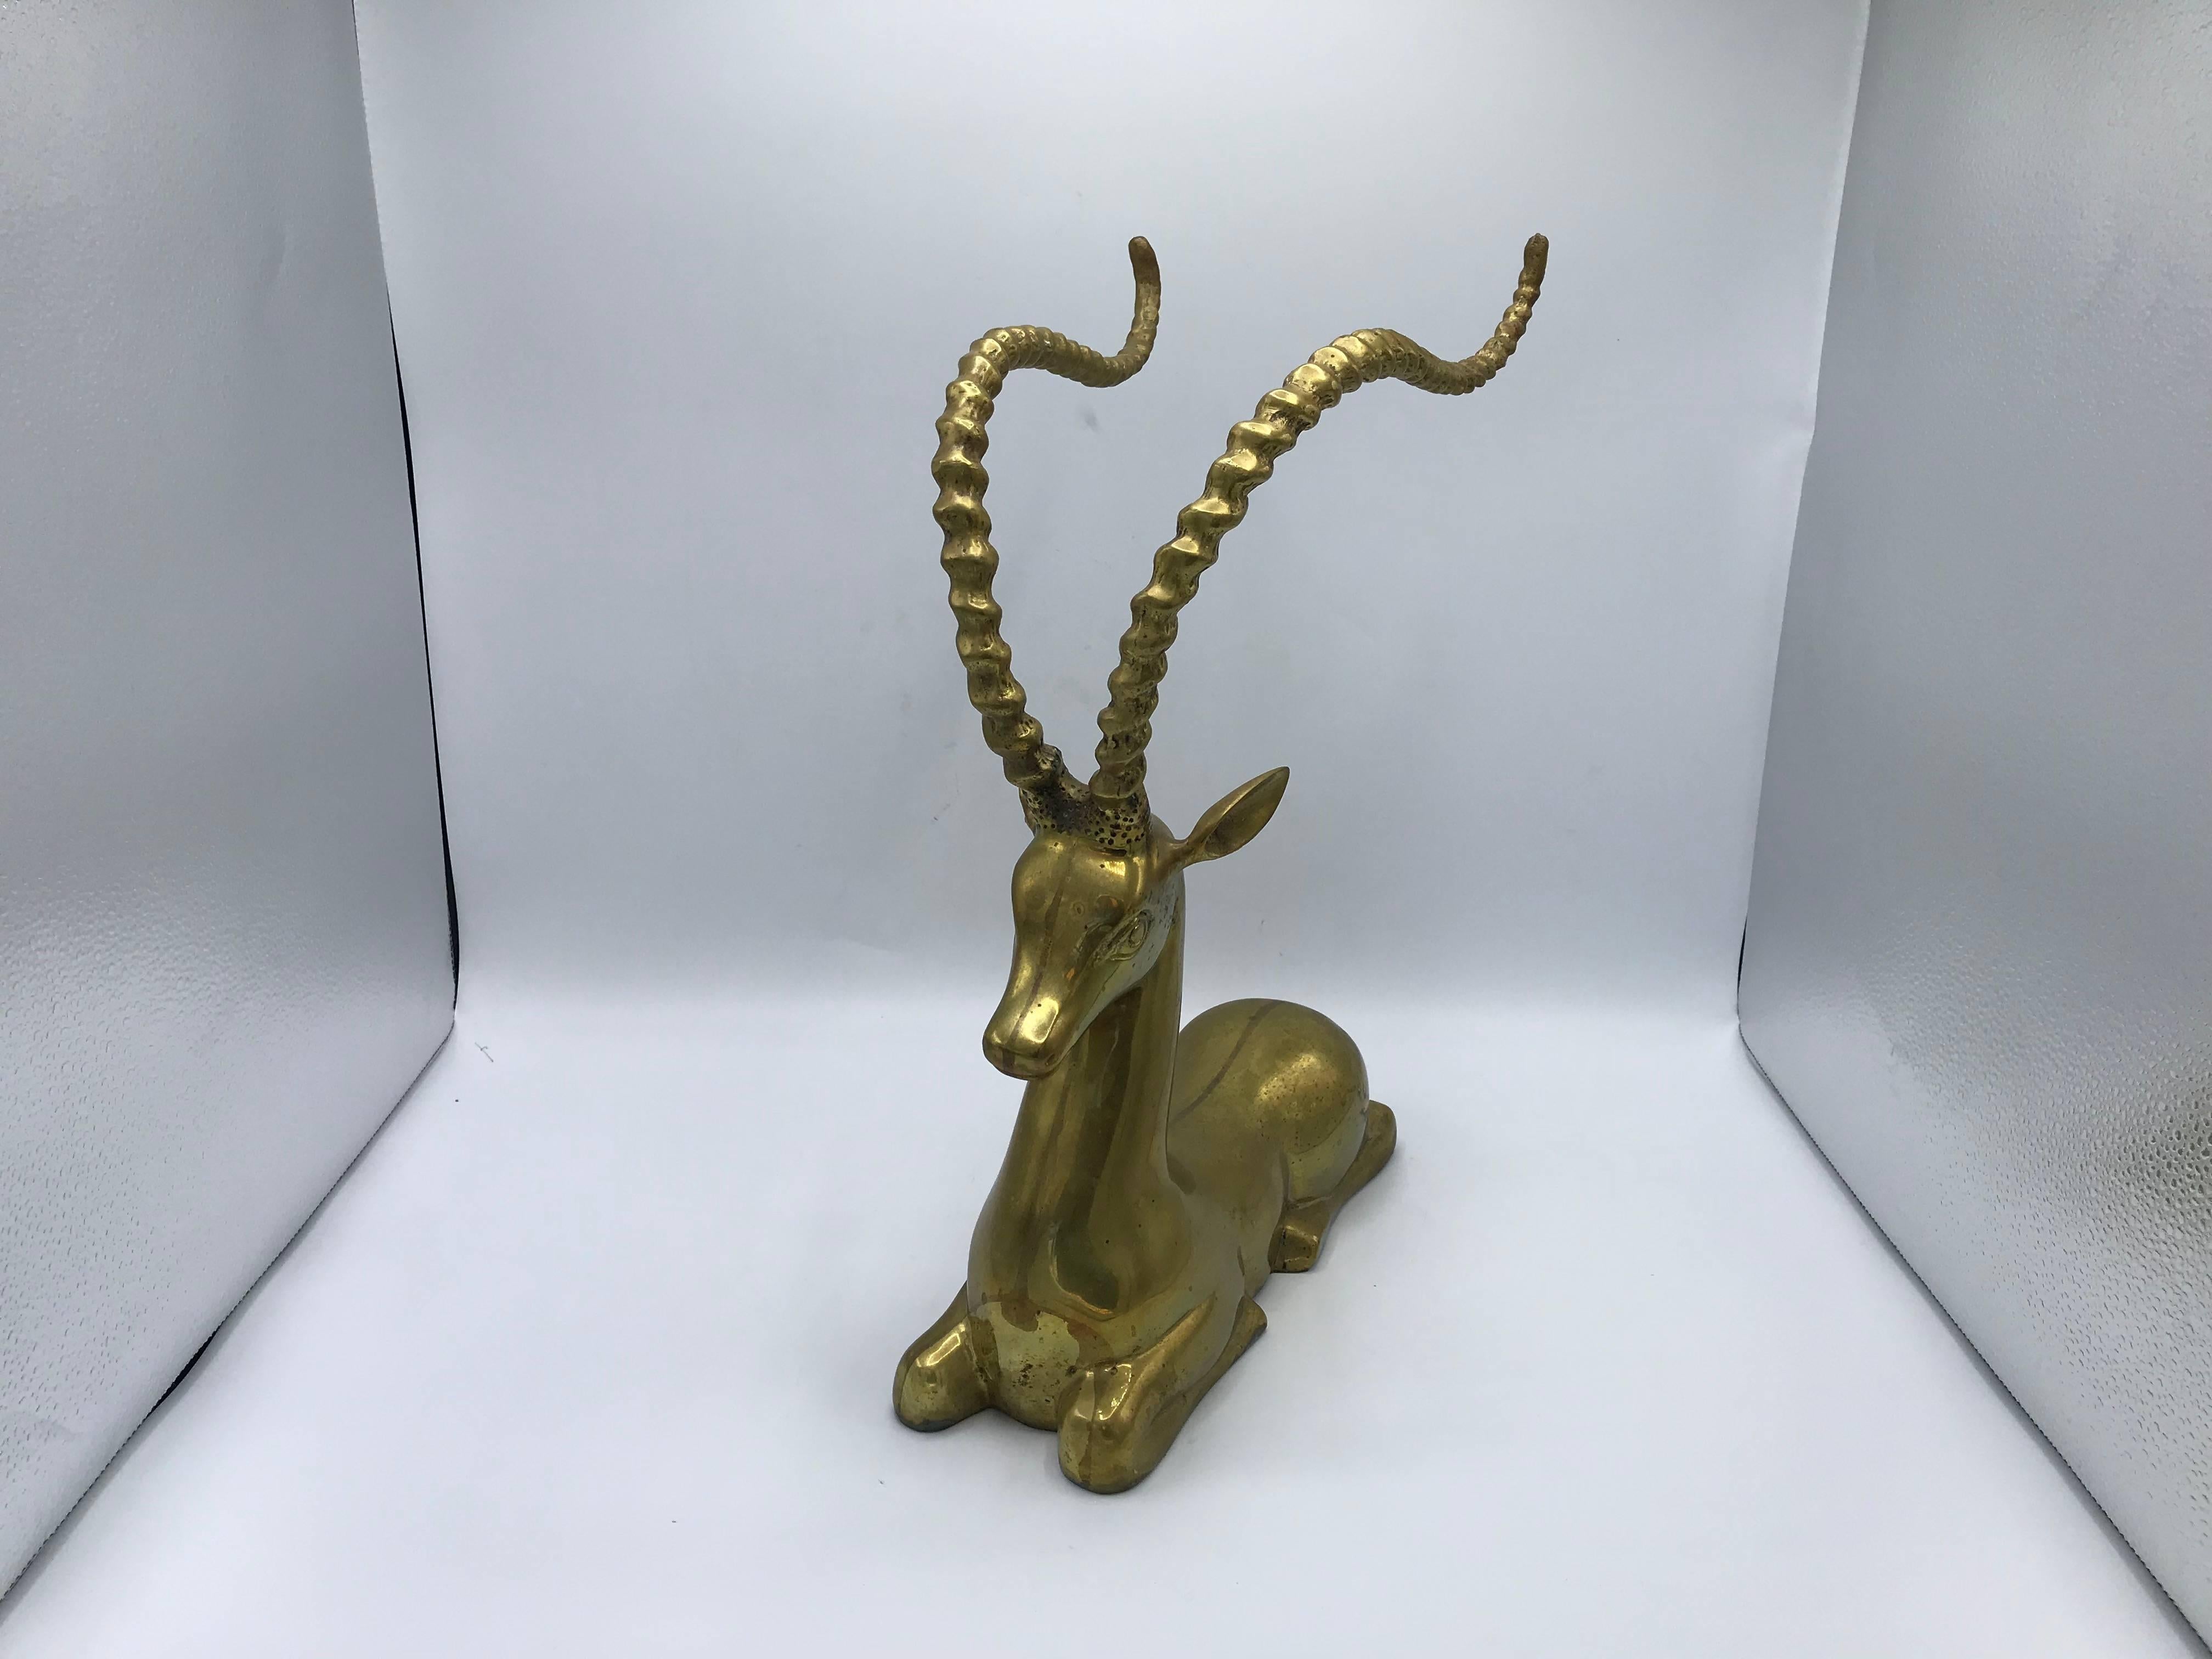 Listed is a gorgeous, 1960s Italian Sarreid Ltd. brass gazelle sculpture. The exaggerated horns give a modern-glam twist, on the seated sculpture. Incredibly heavy, weighing 12lbs.